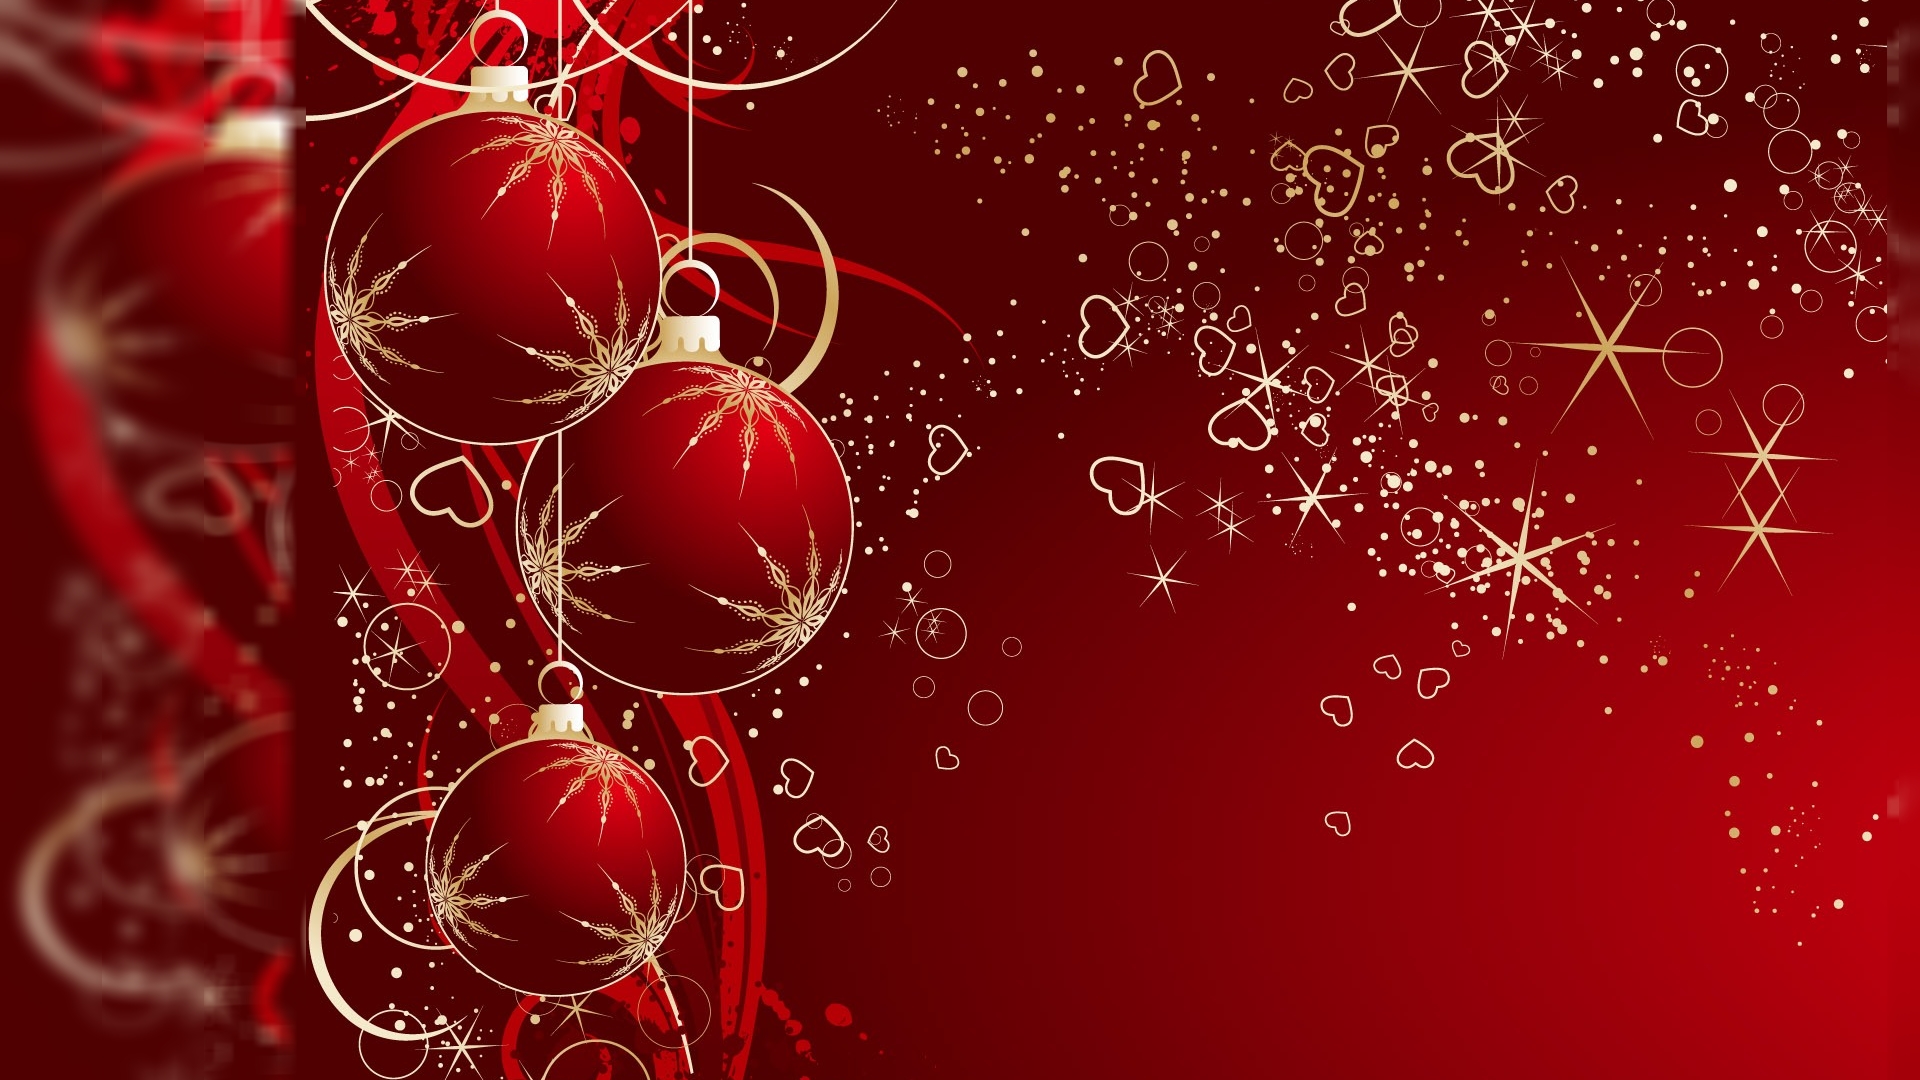 Free Christmas Wallpaper Backgrounds For Computer 